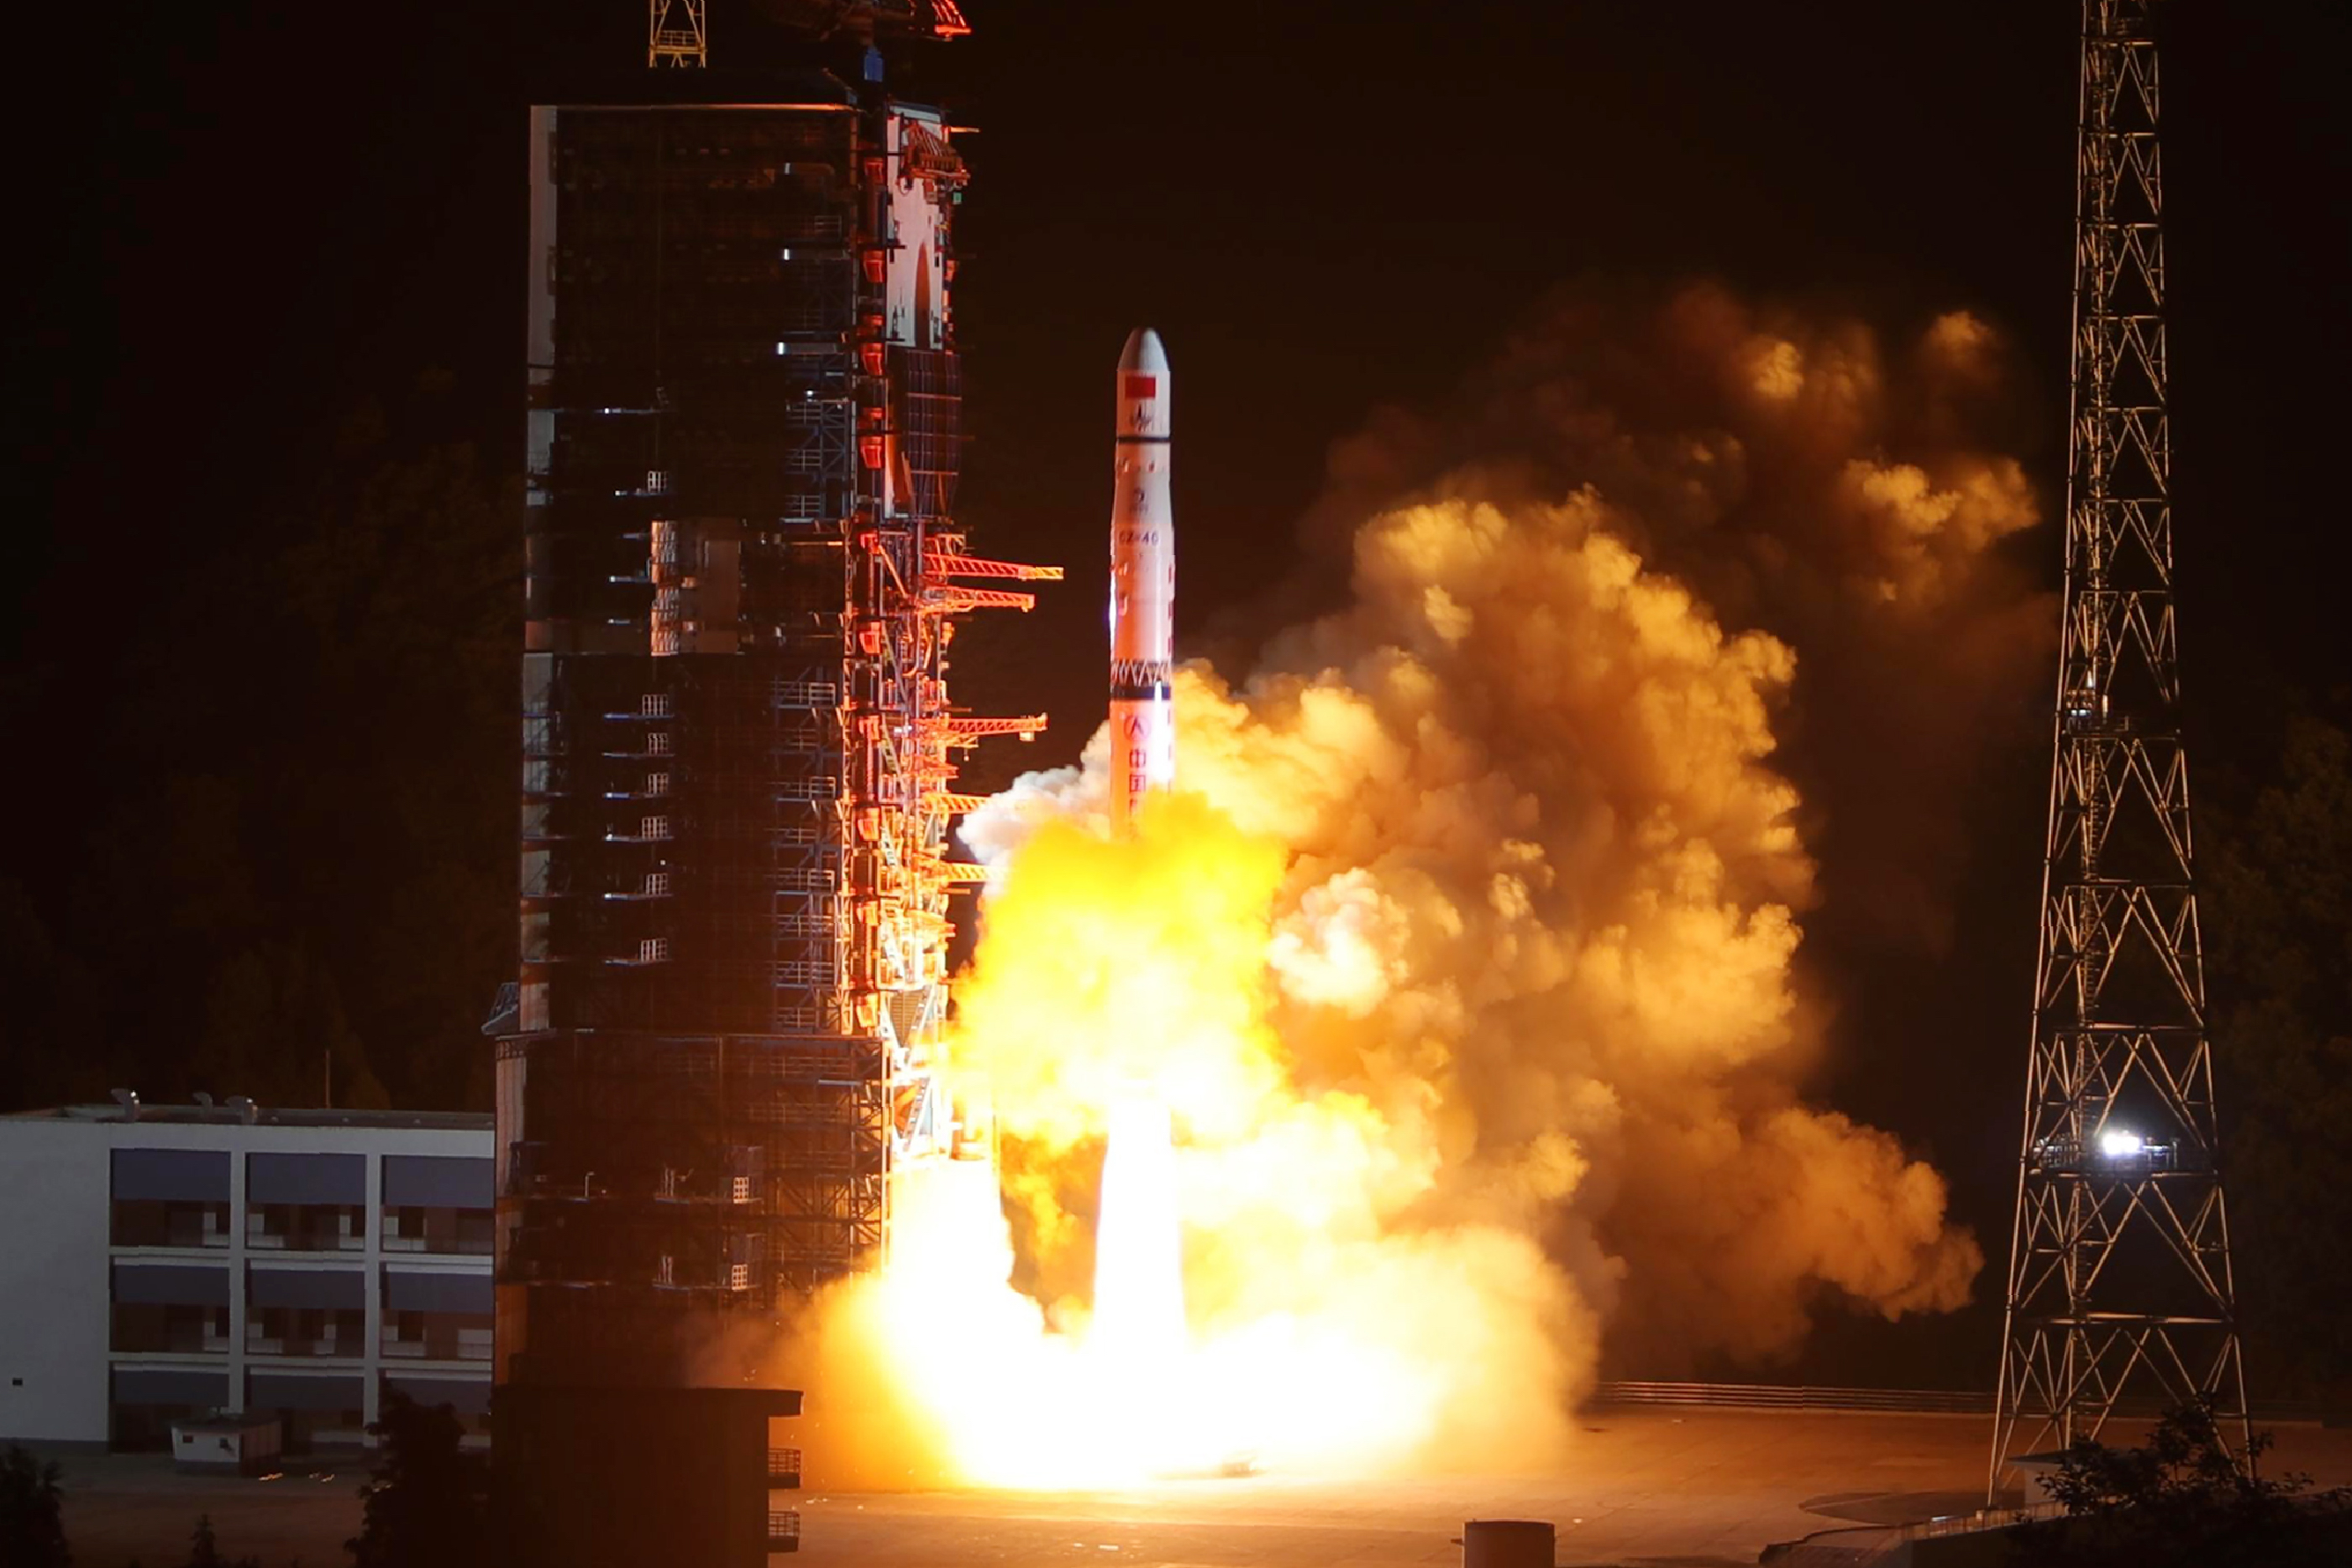 A Long March-4C rocket lifts off from the southwestern Xichang launch centre carrying the Queqiao ("Magpie Bridge") satellite in Xichang, China's southwestern Sichuan province on May 21, 2018. - China on May 21 launched a communications relay satellite that will allow a rover to send images from the far side of the Moon on an unprecedented mission later this year. (Photo by - / AFP) / China OUT        (Photo credit should read -/AFP/Getty Images)